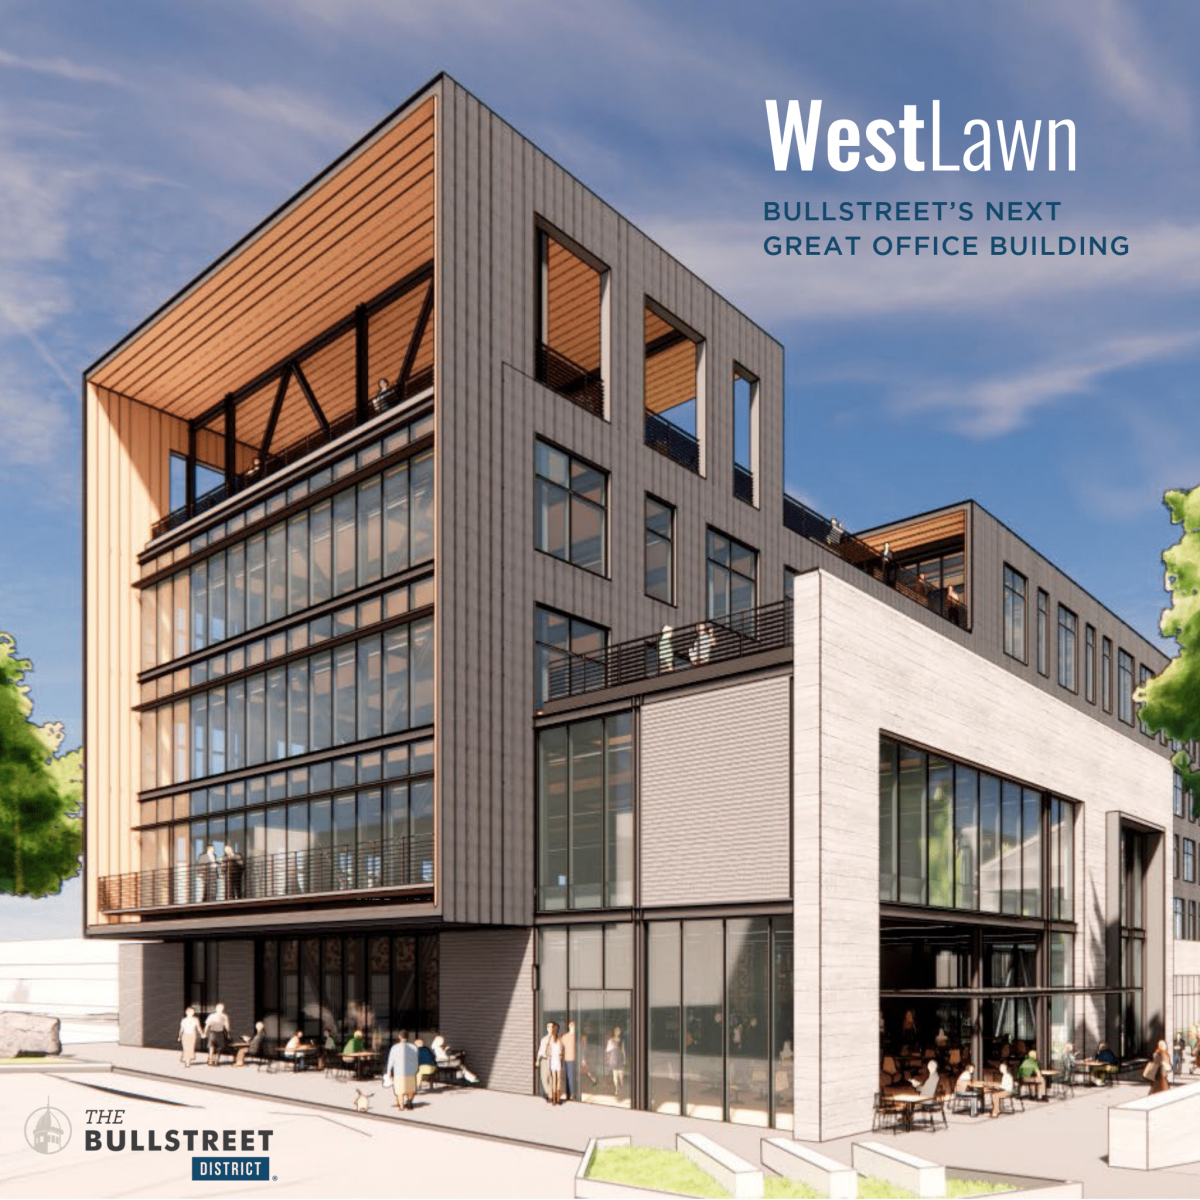 The 79,000-square-foot WestLawn building will include office and retail space and be constructed of cross-laminated timber. (Rendering/Provided)